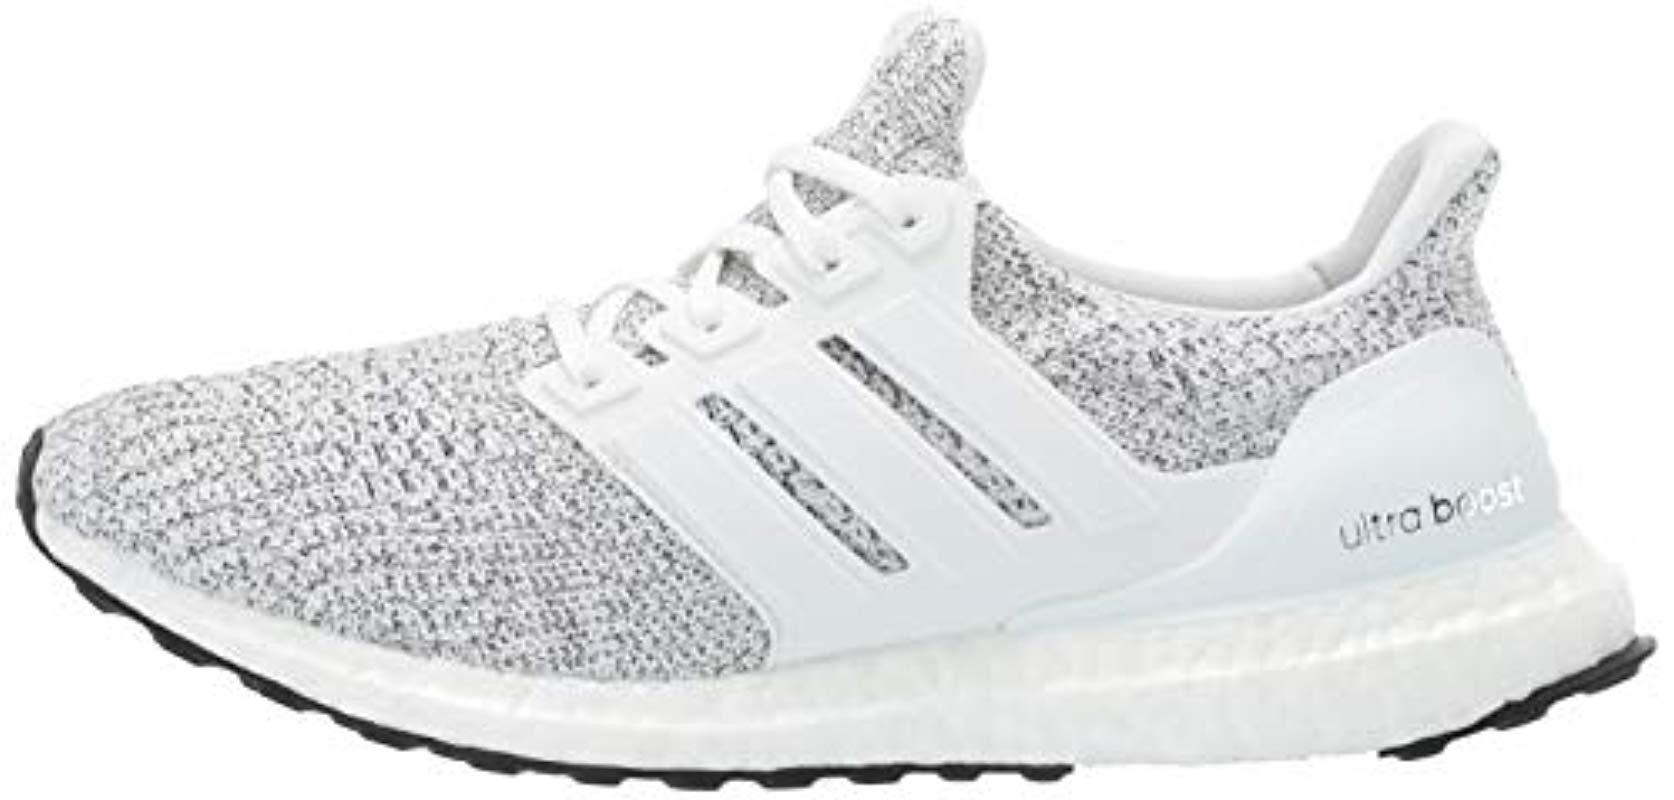 white and neon ultra boost